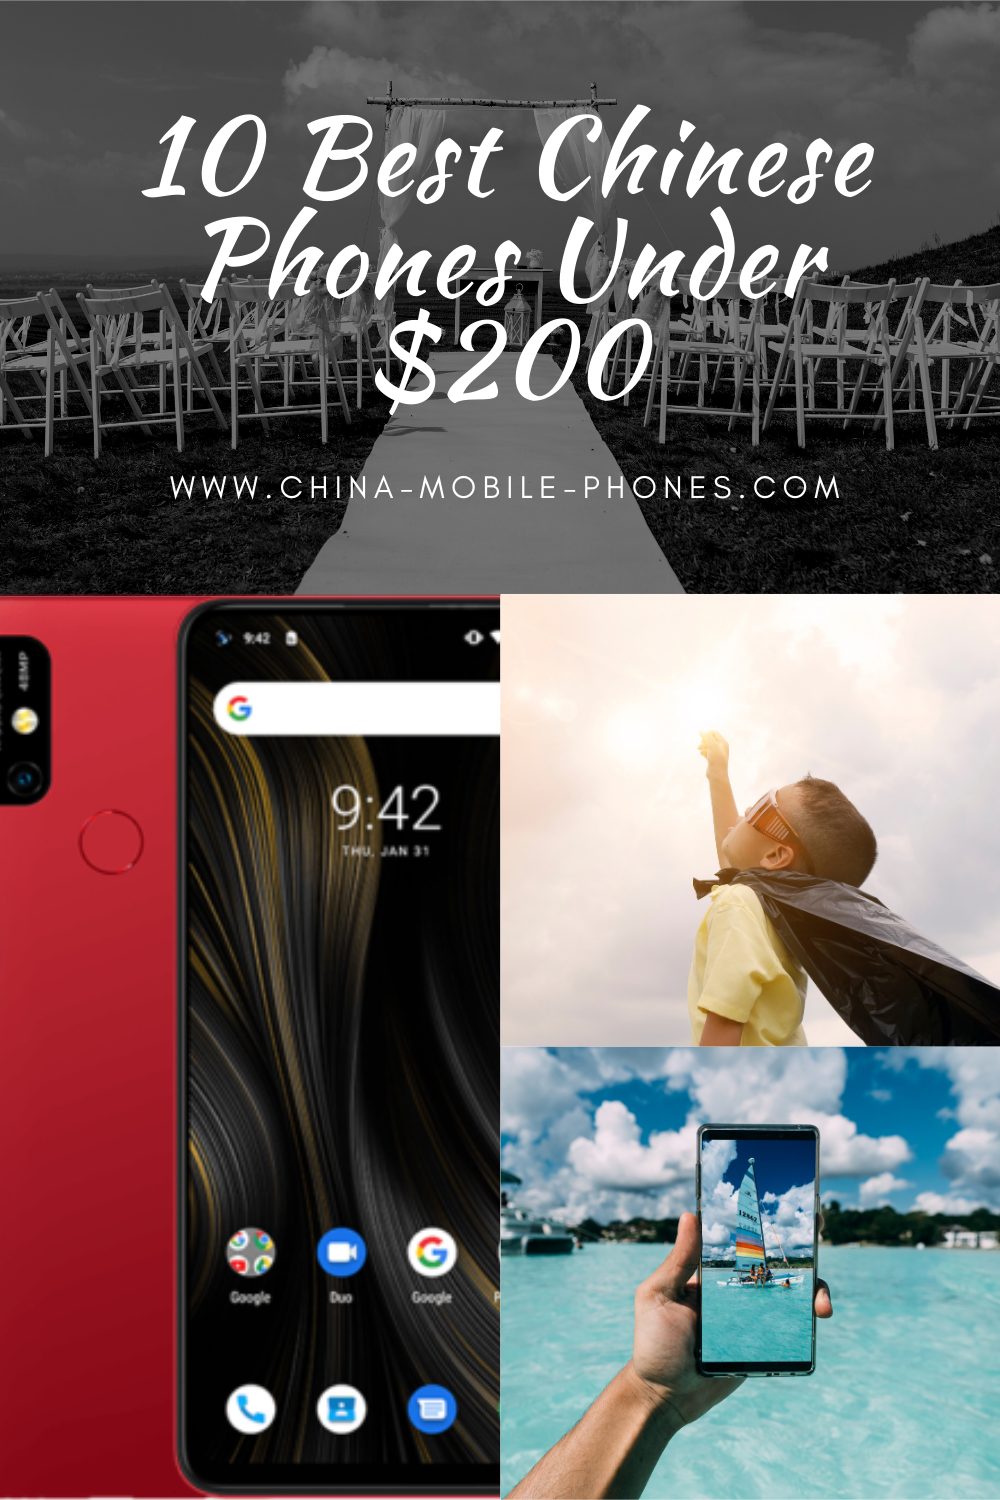 Best Chinese Phones Under $200.you can get a smartphone from China that fully handles all the tasks of a modern smartphone.